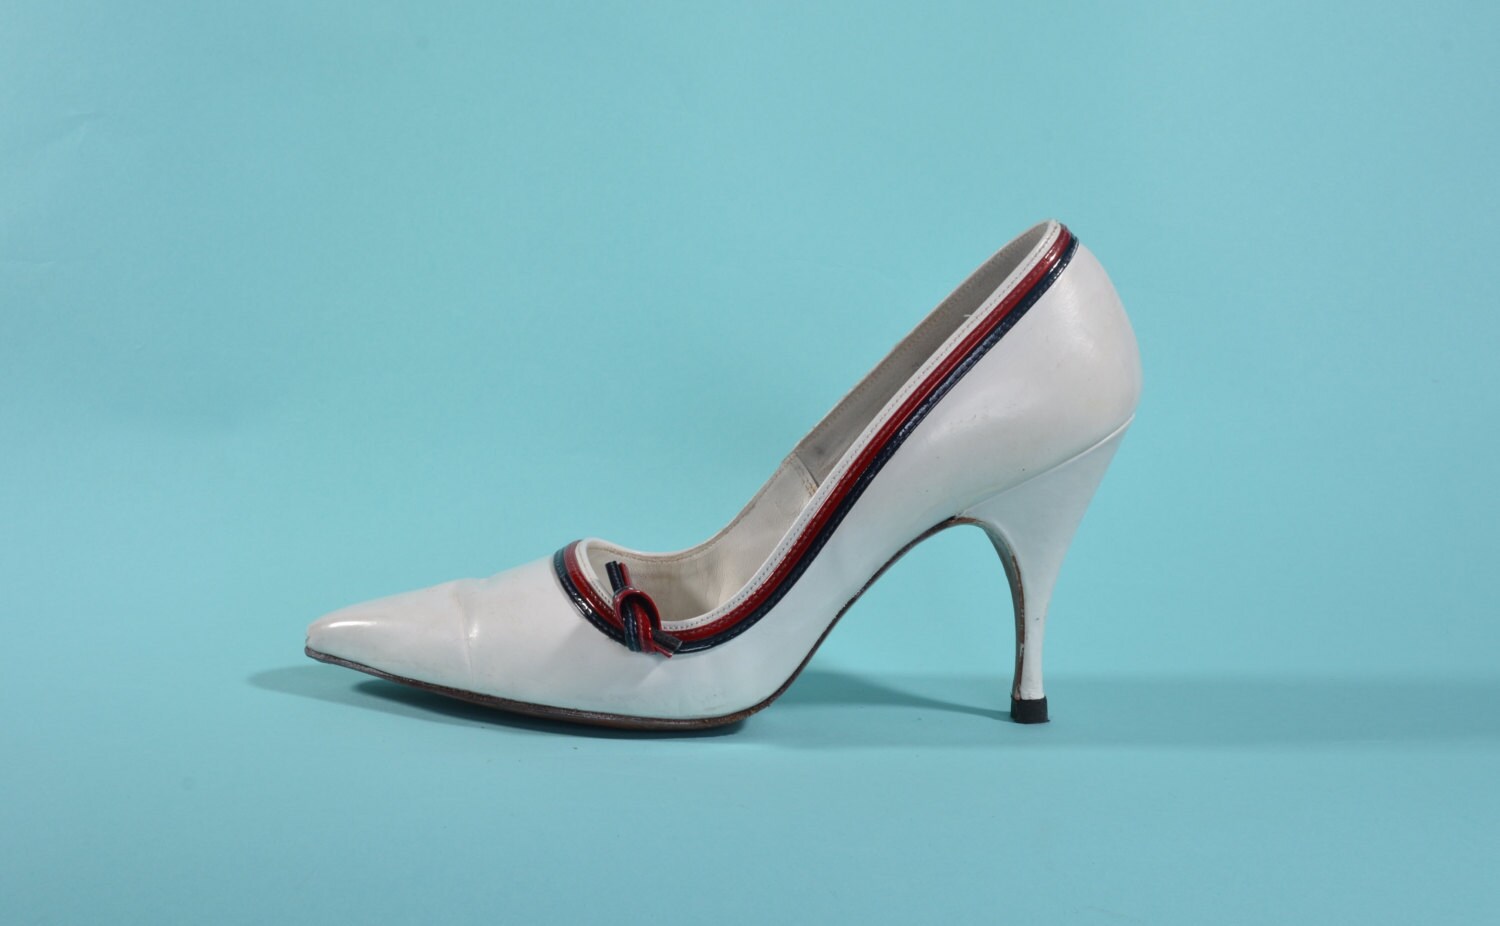 Vintage 1960s White Wedding Shoes Red Navy Blue Leather High